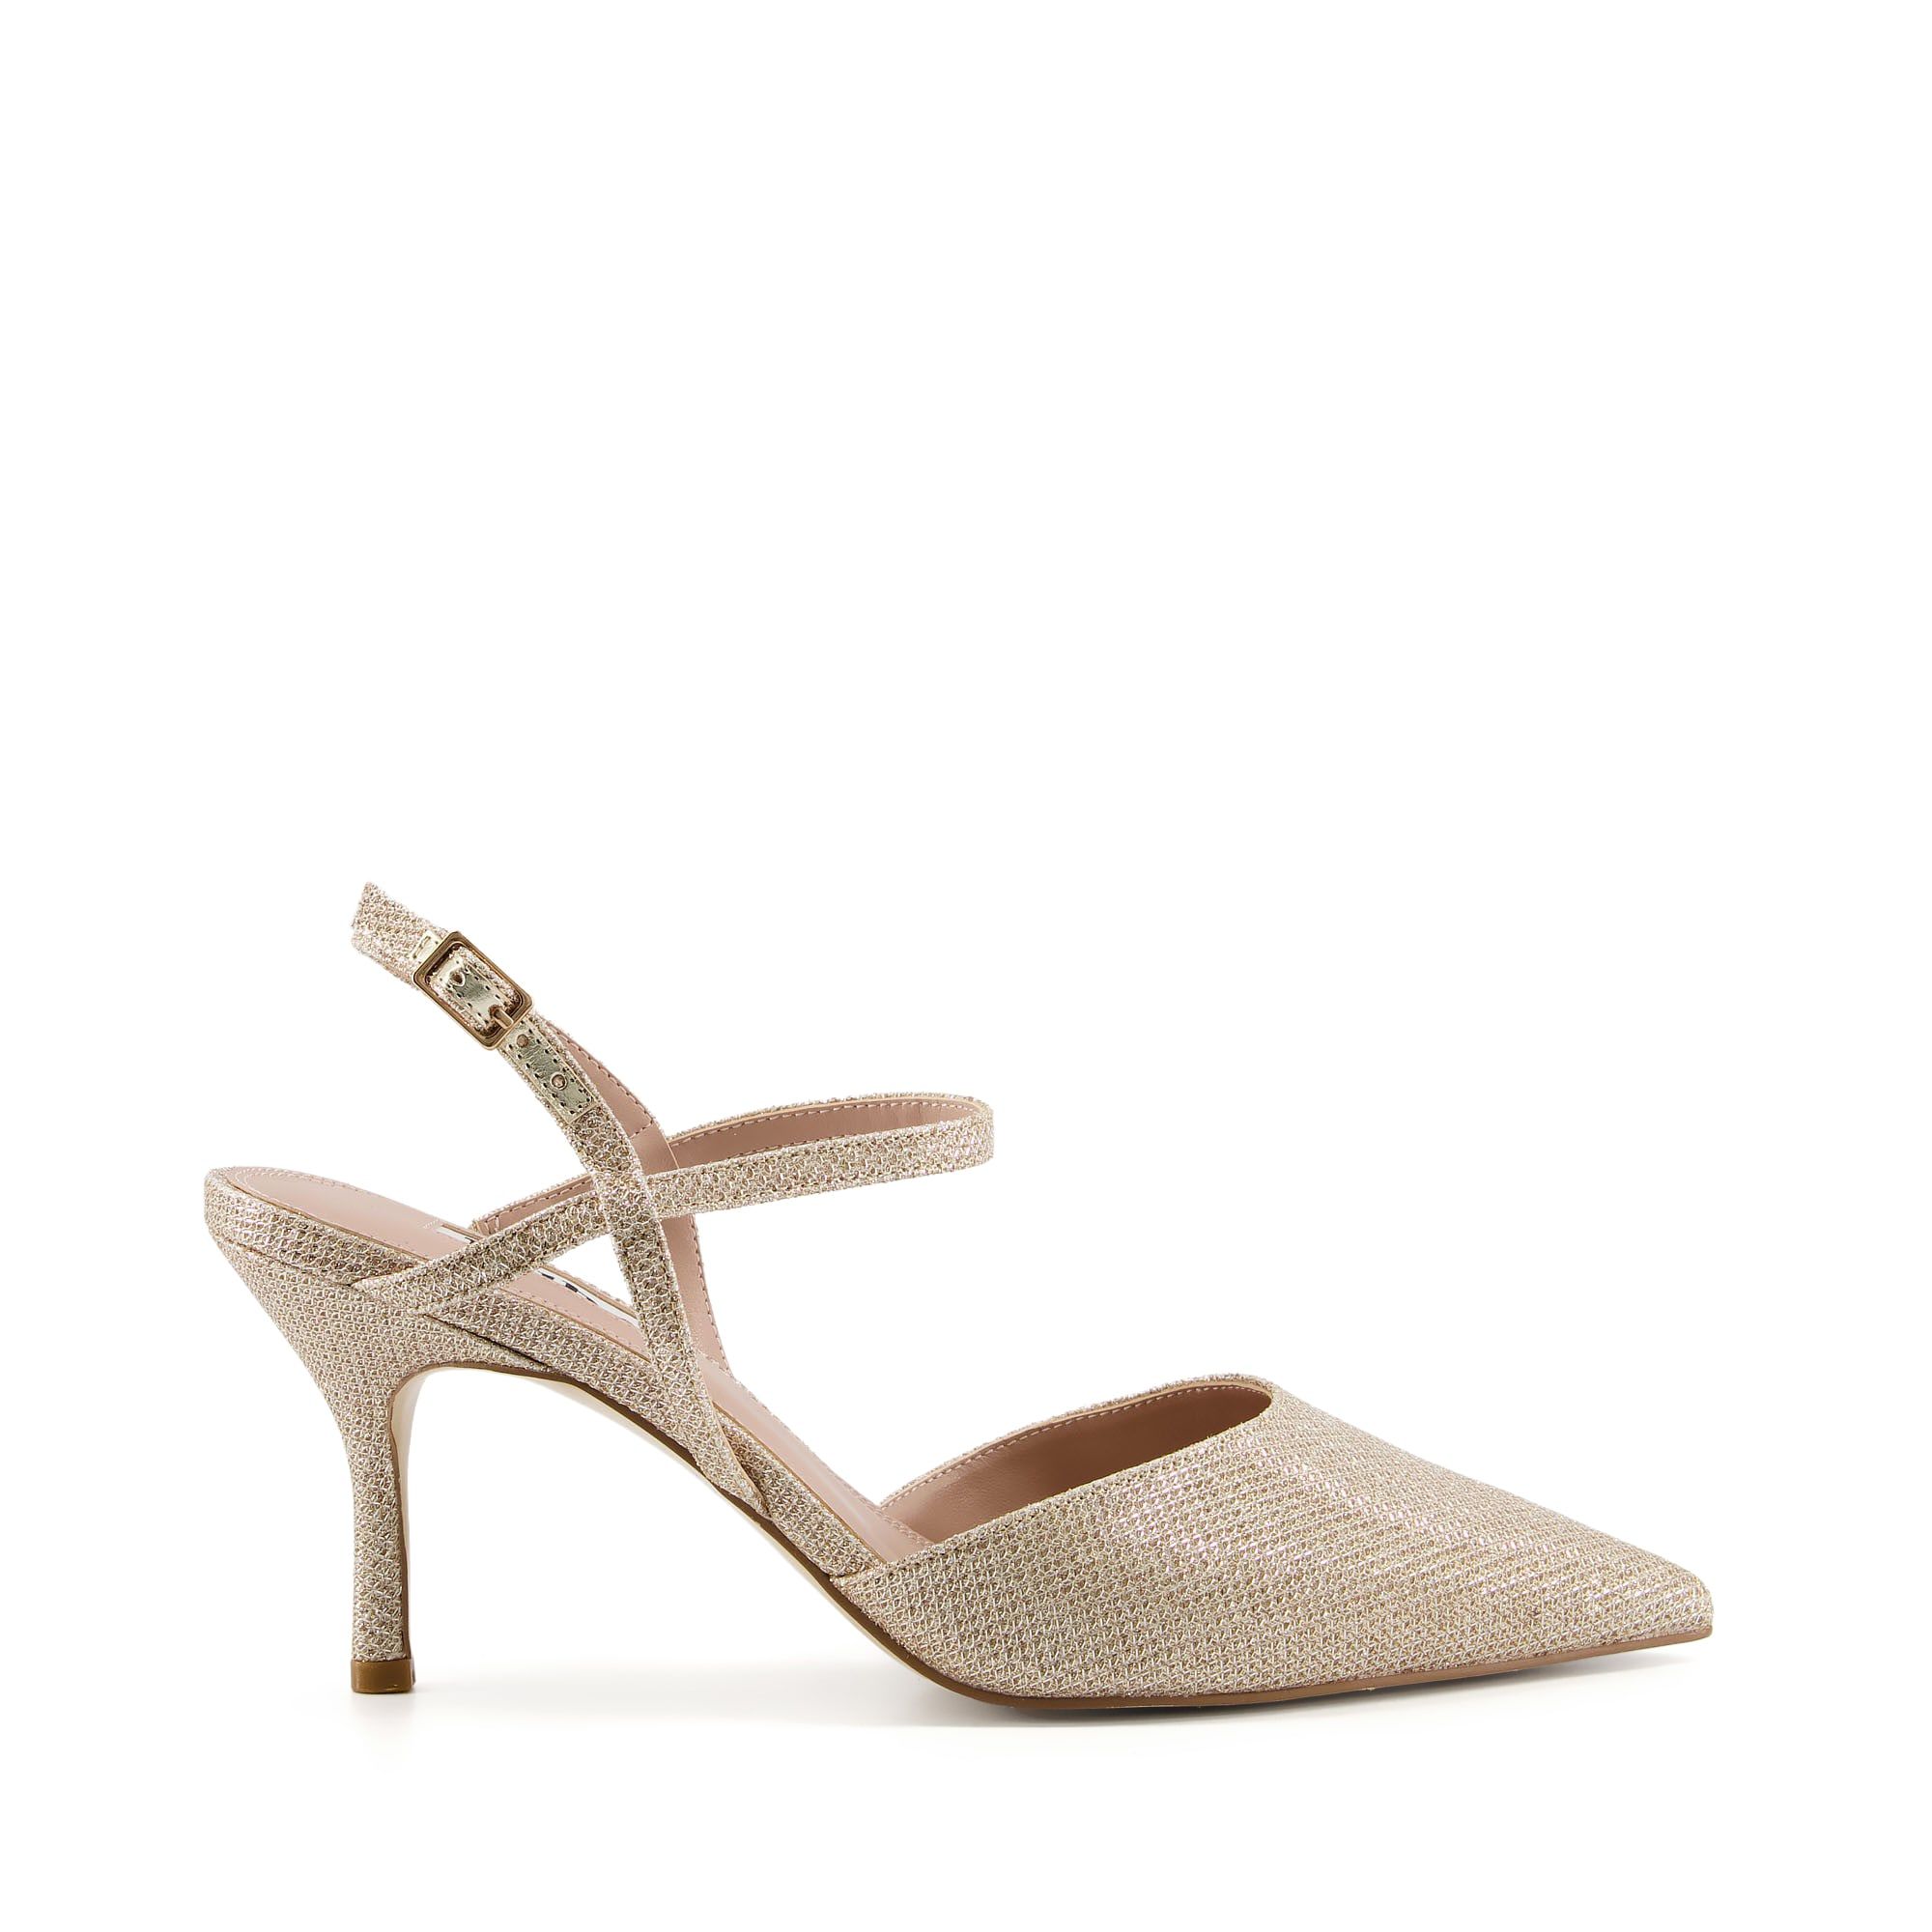 Dune Ladies DEETA Cross Strap Point Heels -Slip on these court shoes from Dune for a chic day-to-night look. They're designed with a mid-height stiletto kitten heel for comfortable wear.